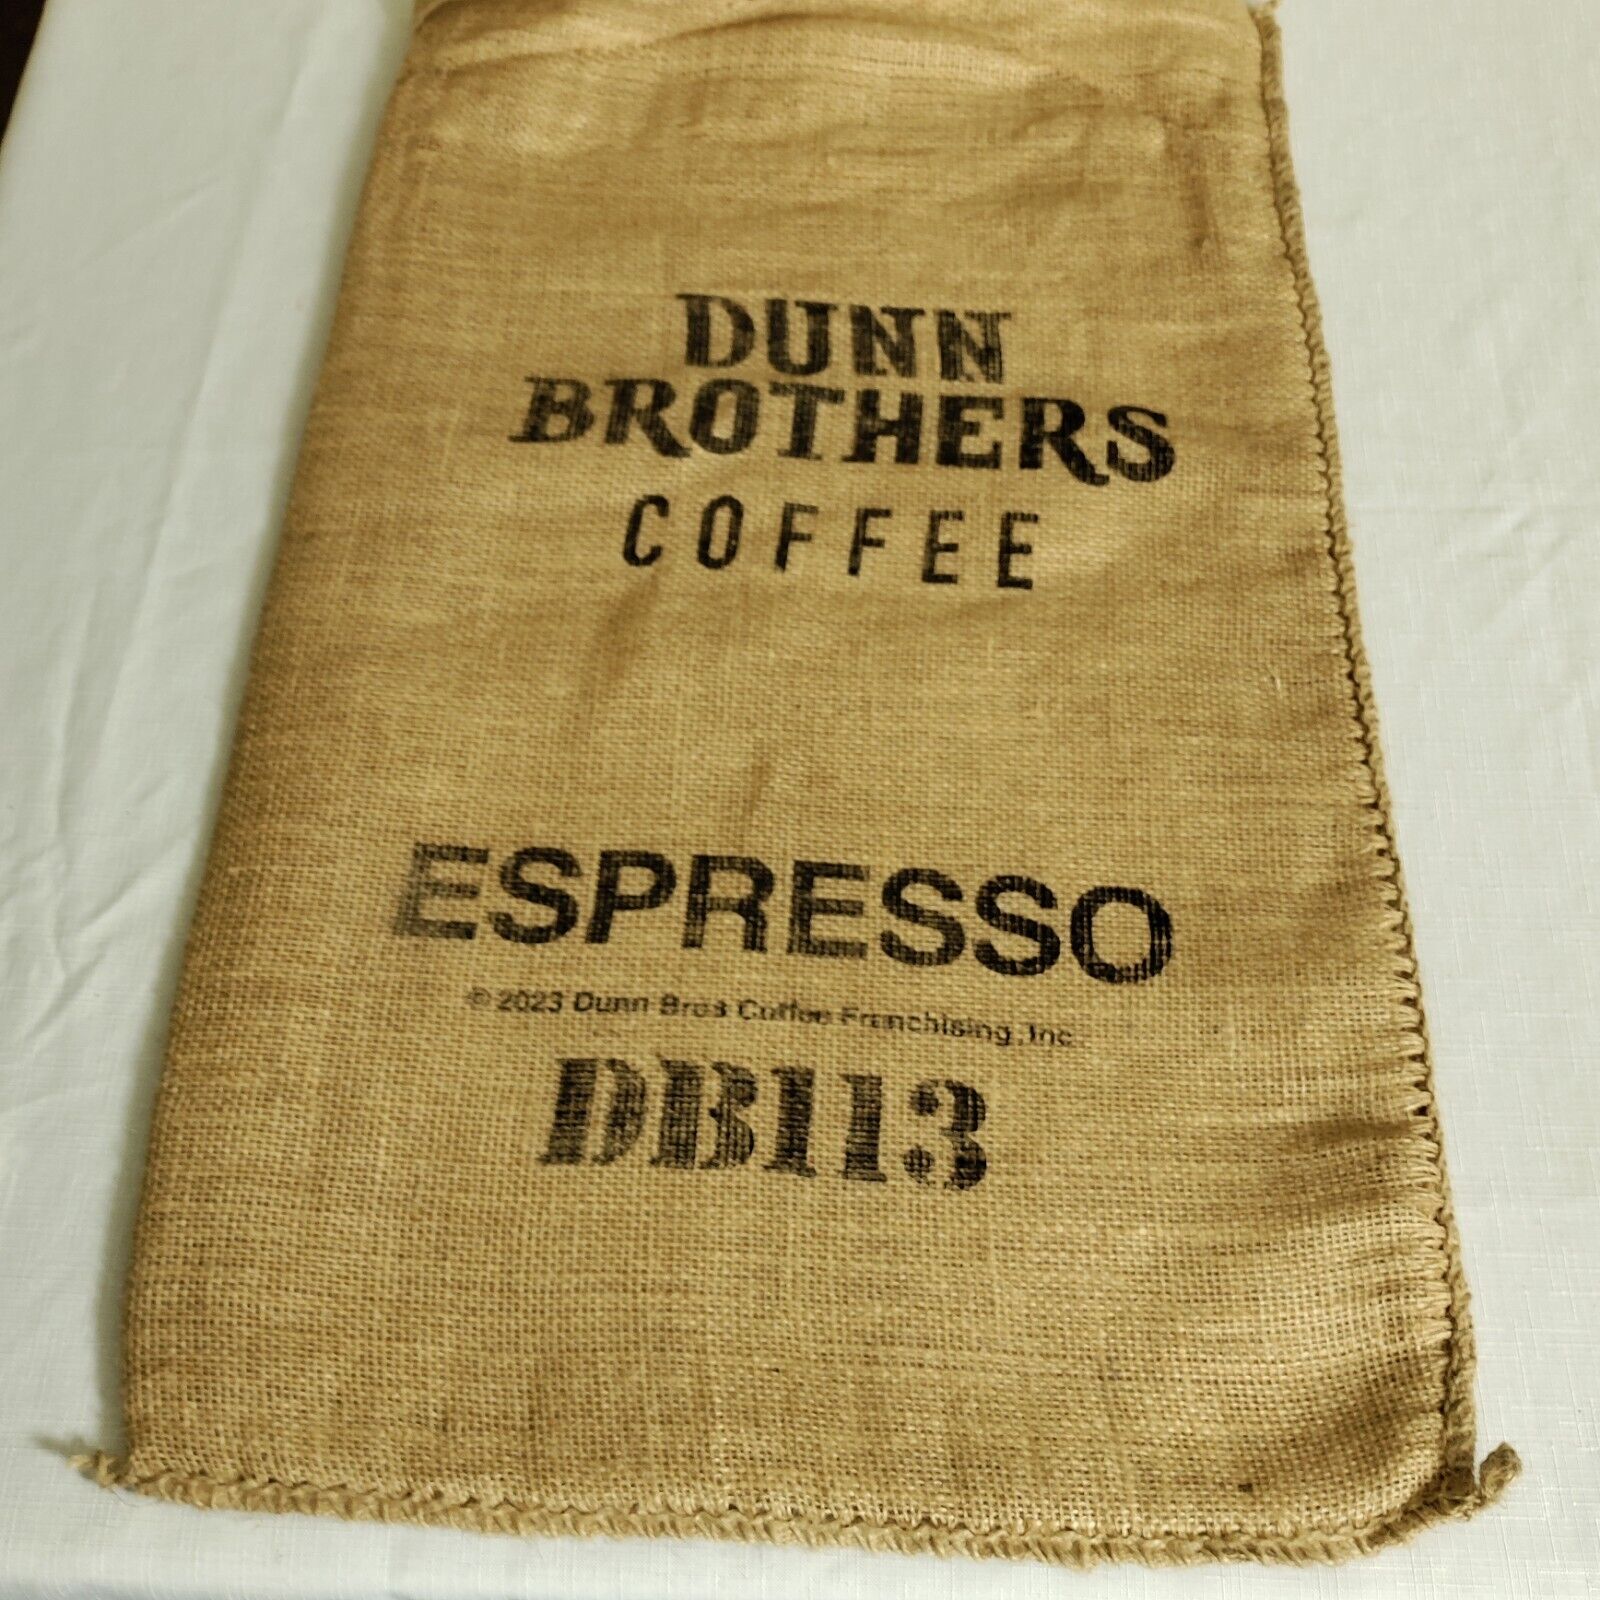 Dunn Brothers Espresso Coffee Bean Burlap Bag Approximately 30”x 17” 